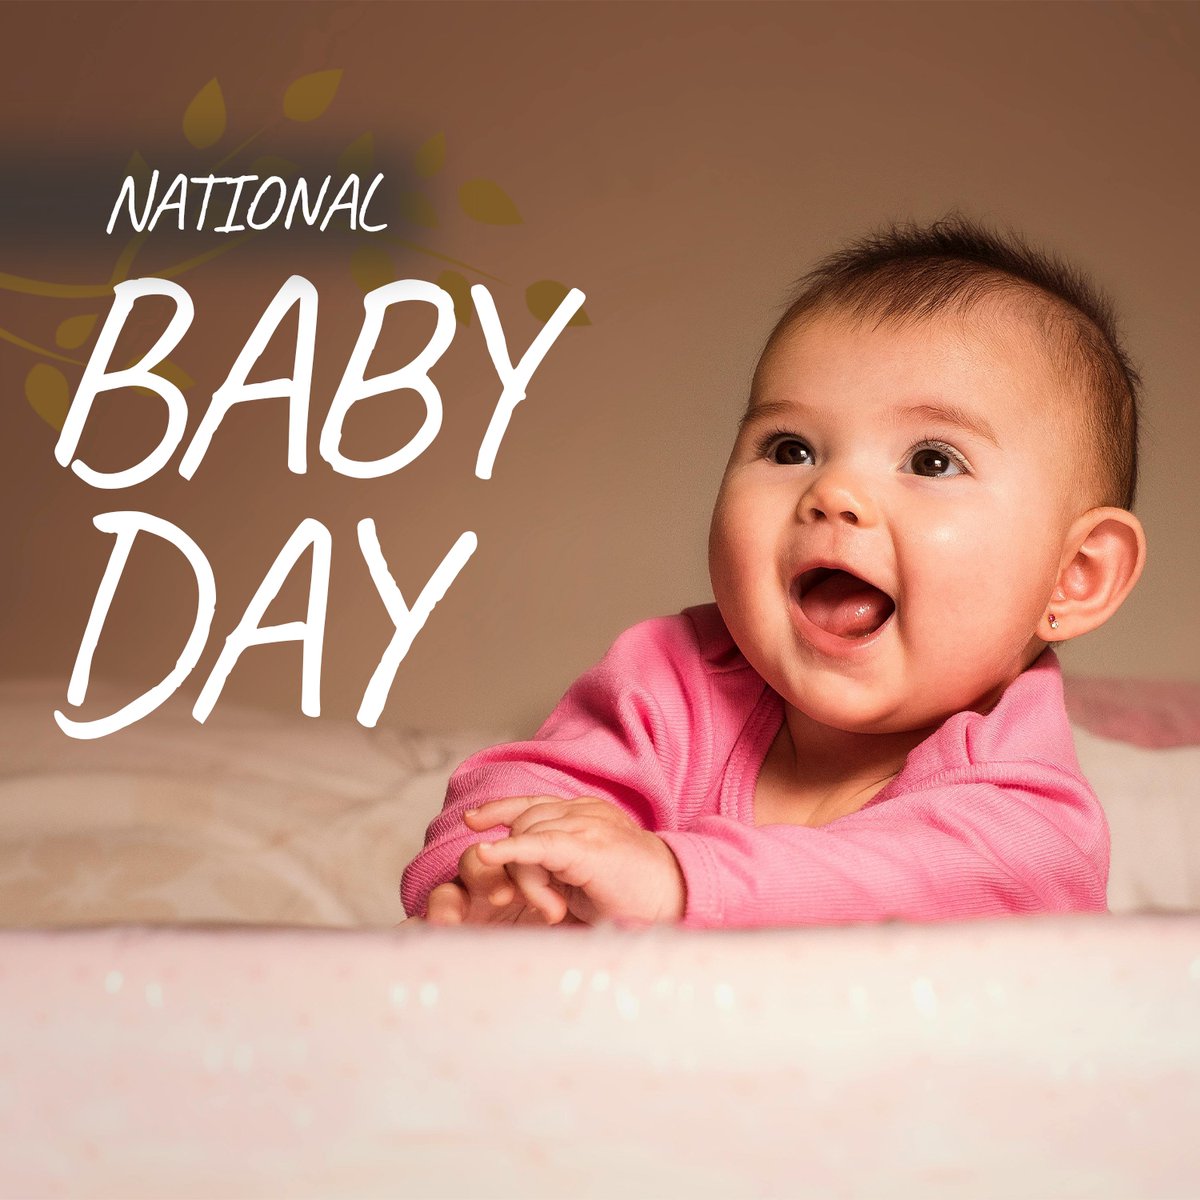 Today, we celebrate the little ones who bring endless joy, laughter, and love into our lives.

Share a photo or a cherished memory of your baby in the comments below. 👶 

#FertilityWellnessInstitute #FertilityWellnessInstituteOhio #JourneyToParenthood #InfertilitySupport